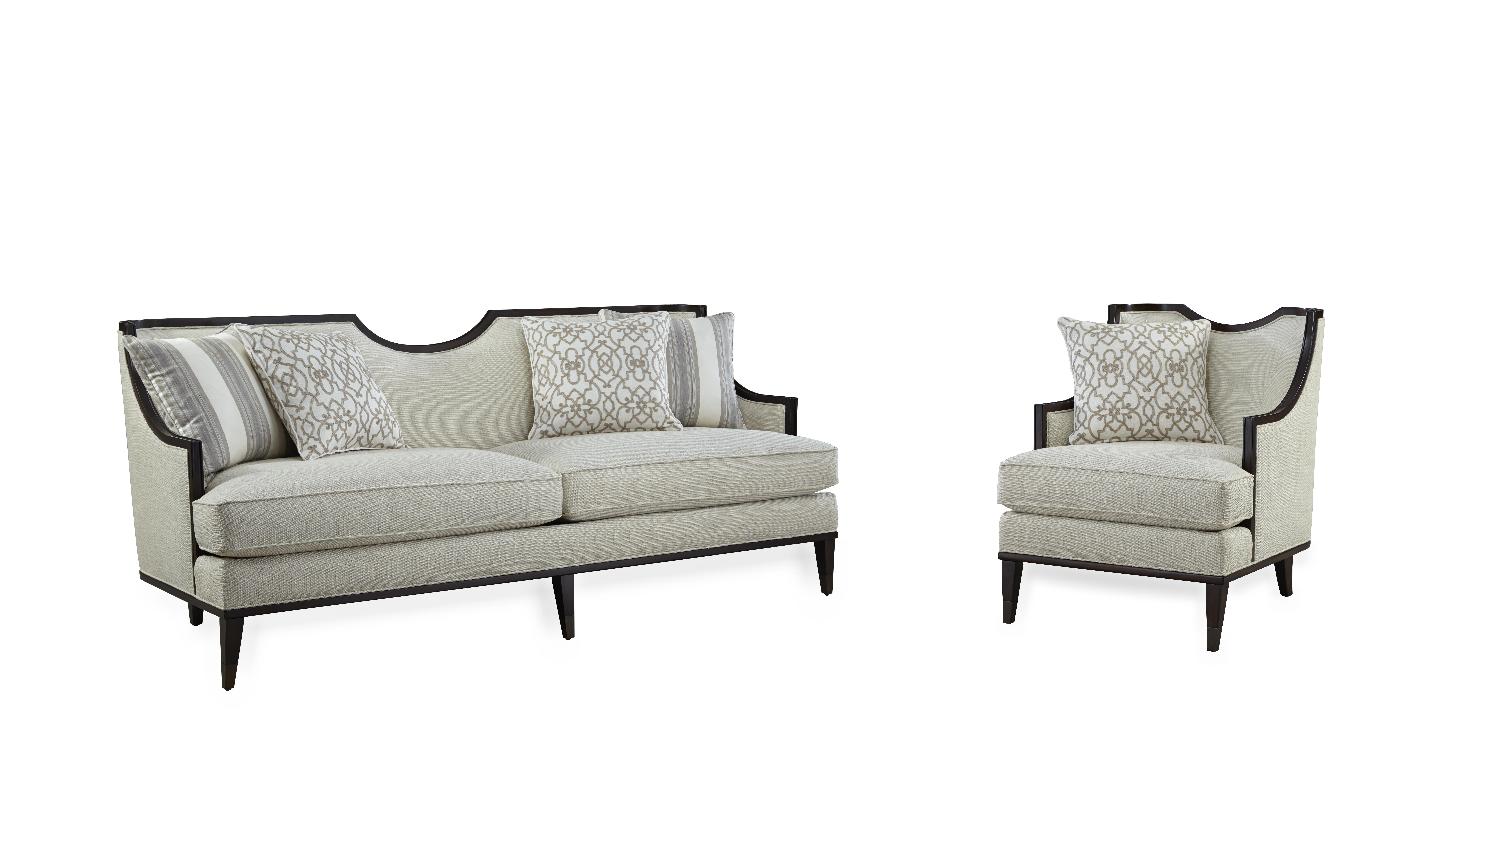 Classic, Traditional Sofa and Chair Intrigue Harper 161501-5336AA-2pcs in Ivory Fabric